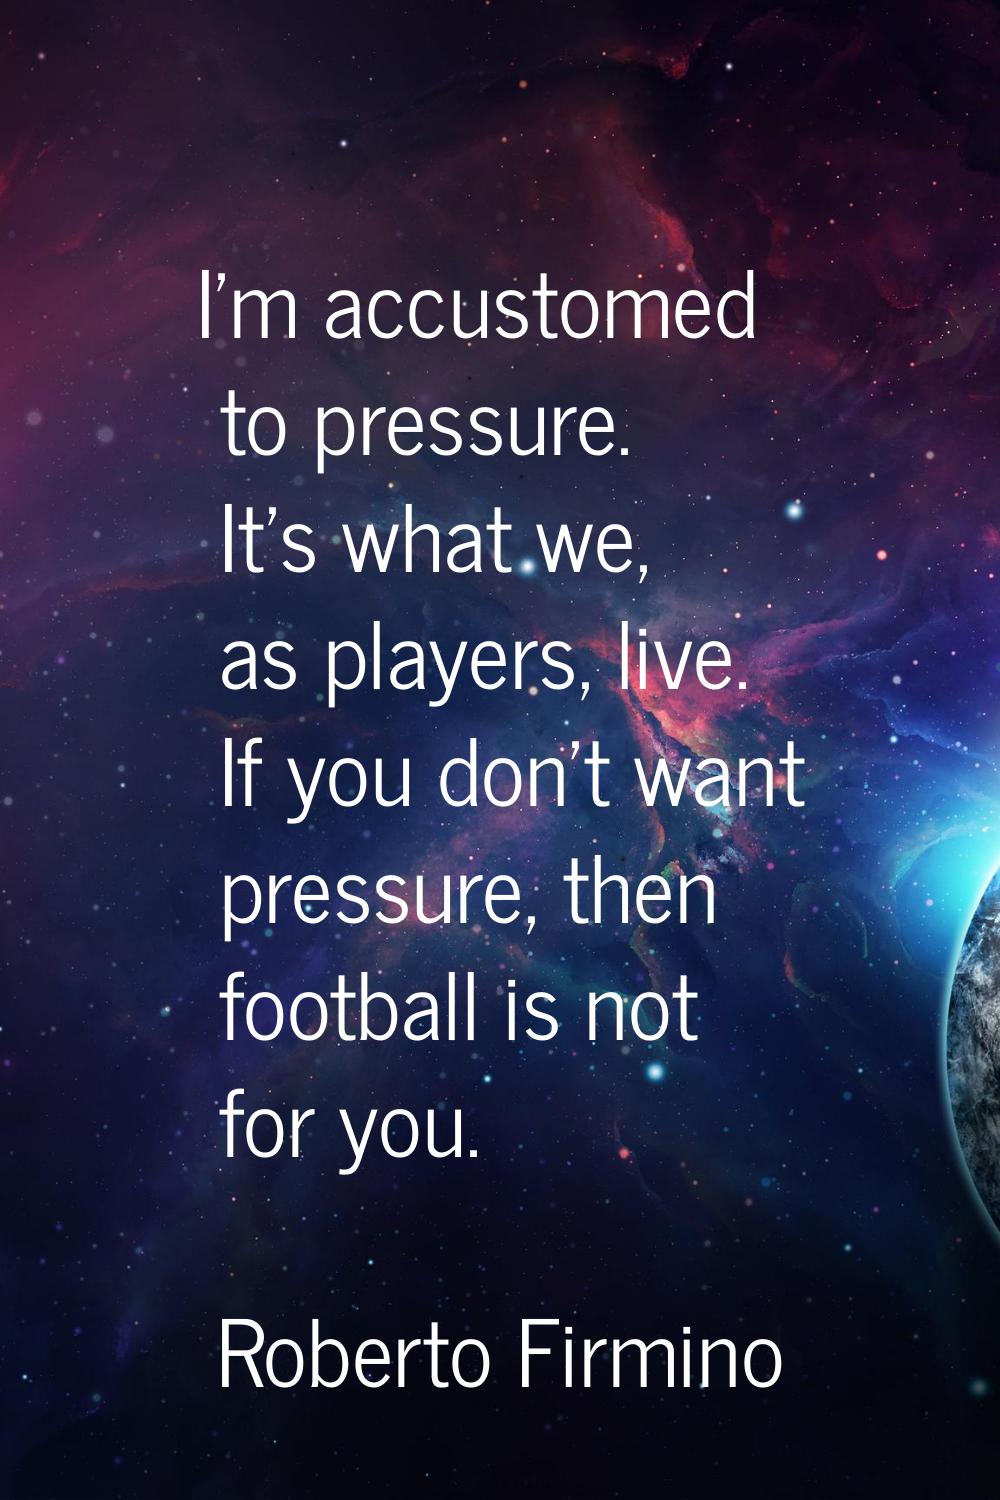 I'm accustomed to pressure. It's what we, as players, live. If you don't want pressure, then footba